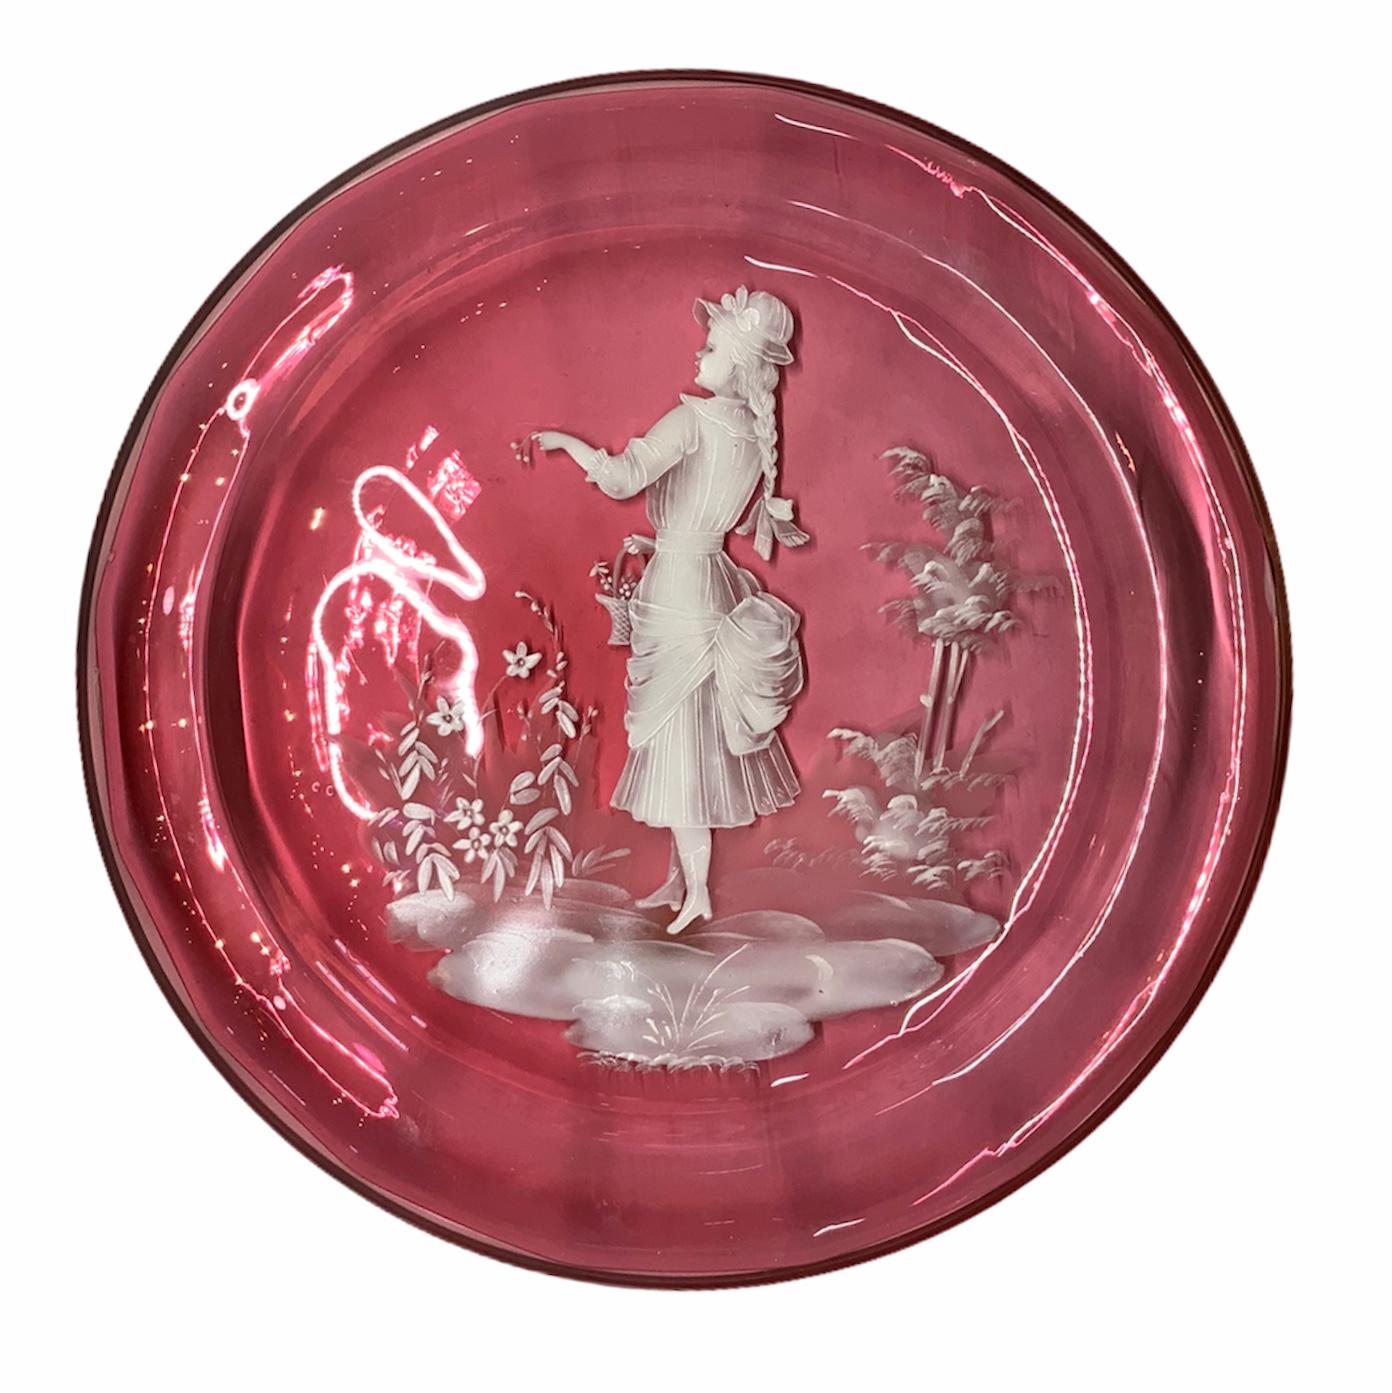 This is a Mary Gregory light cranberry color glass white enameled plate depicting a scene of an elegant Victorian era young girl gathering flowers in a garden and putting them in her basket.